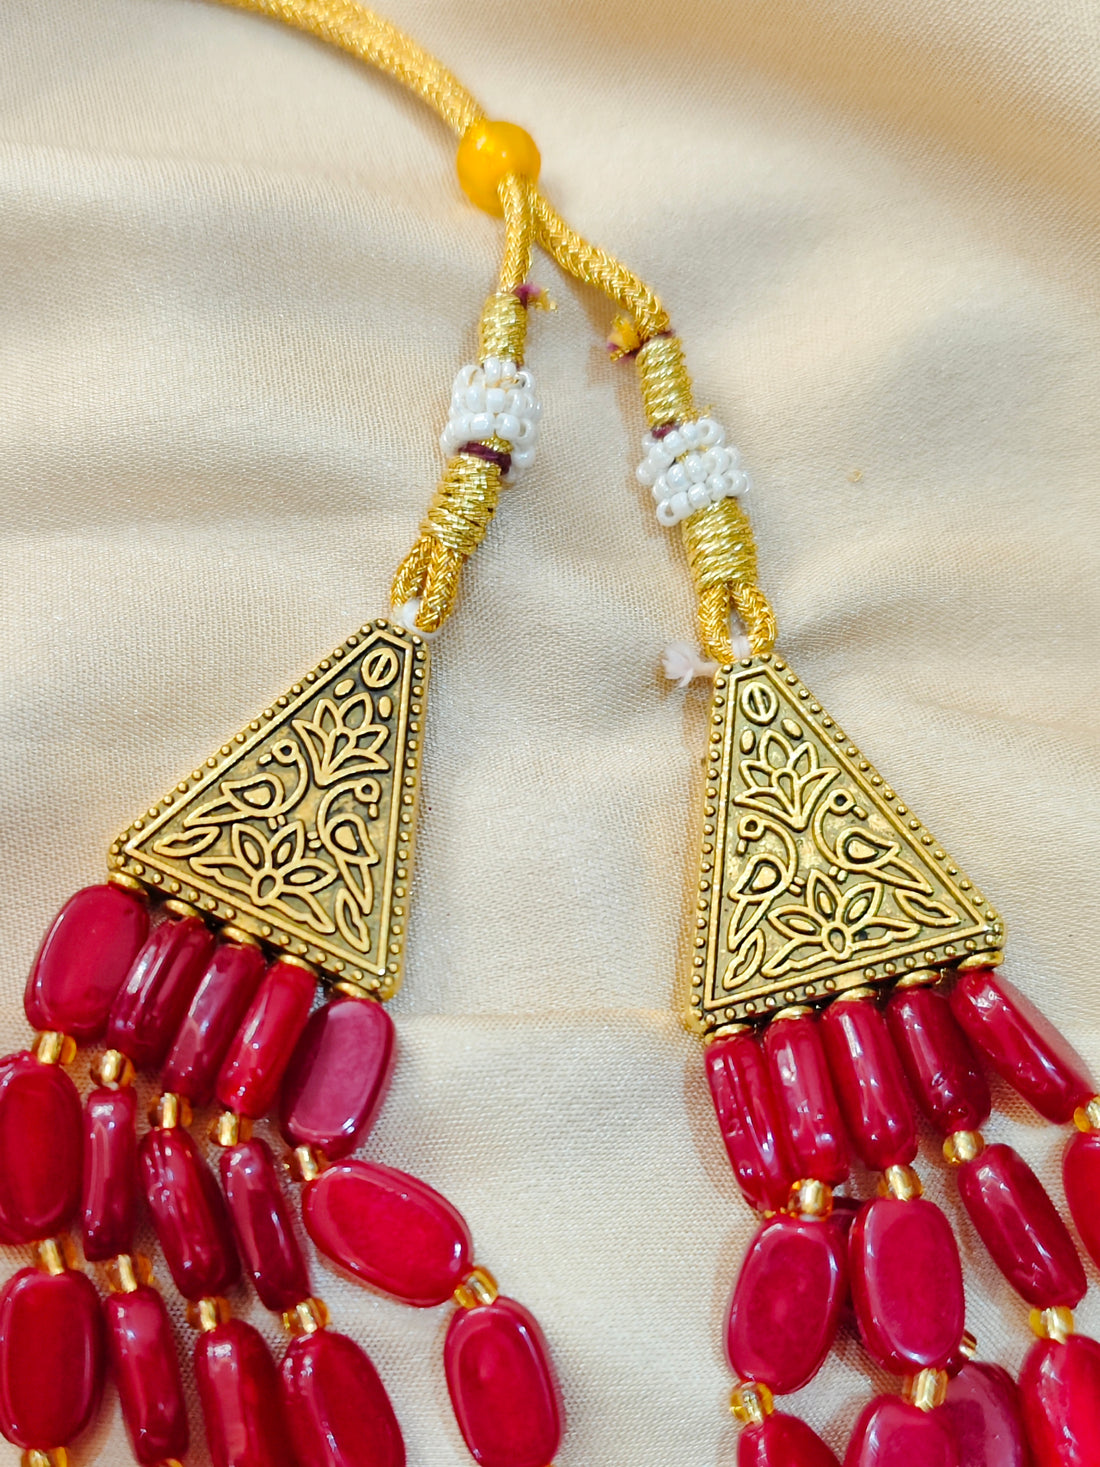 Pravah Stone Necklace Set from House of Mrigaya by Nandini for Traditional and Festive Occasions | Gifting | Wedding & Festive-Red - Mrigaya India